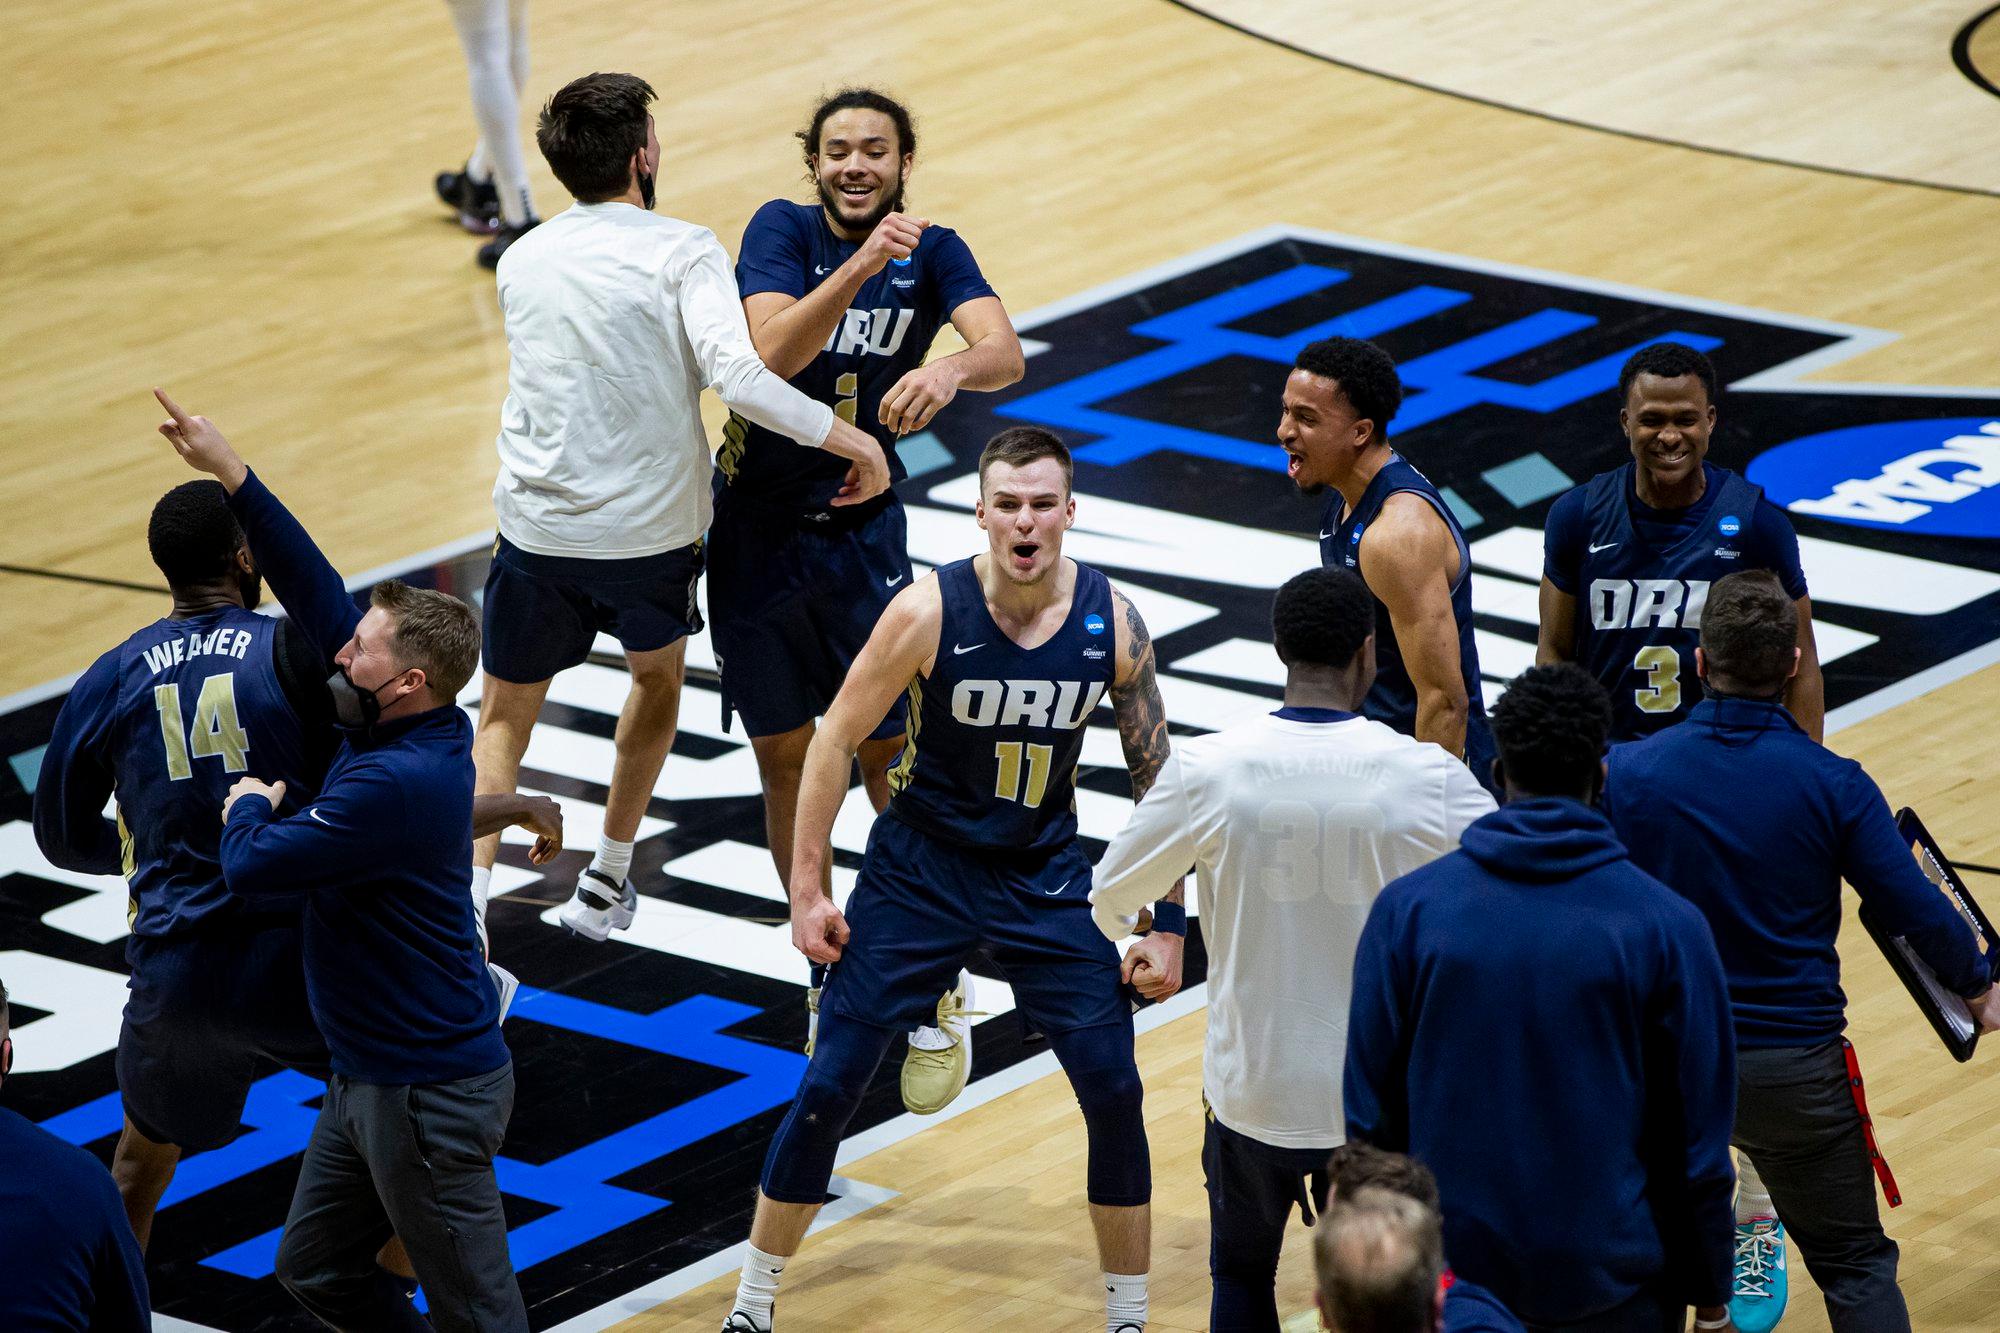 Oral Roberts players and coaches celebrate after beating Ohio State in a first-round game in the NCAA men's college basketball tournament, Friday, March 19, 2021, at Mackey Arena in West Lafayette, Ind. (AP Photo/Robert Franklin)